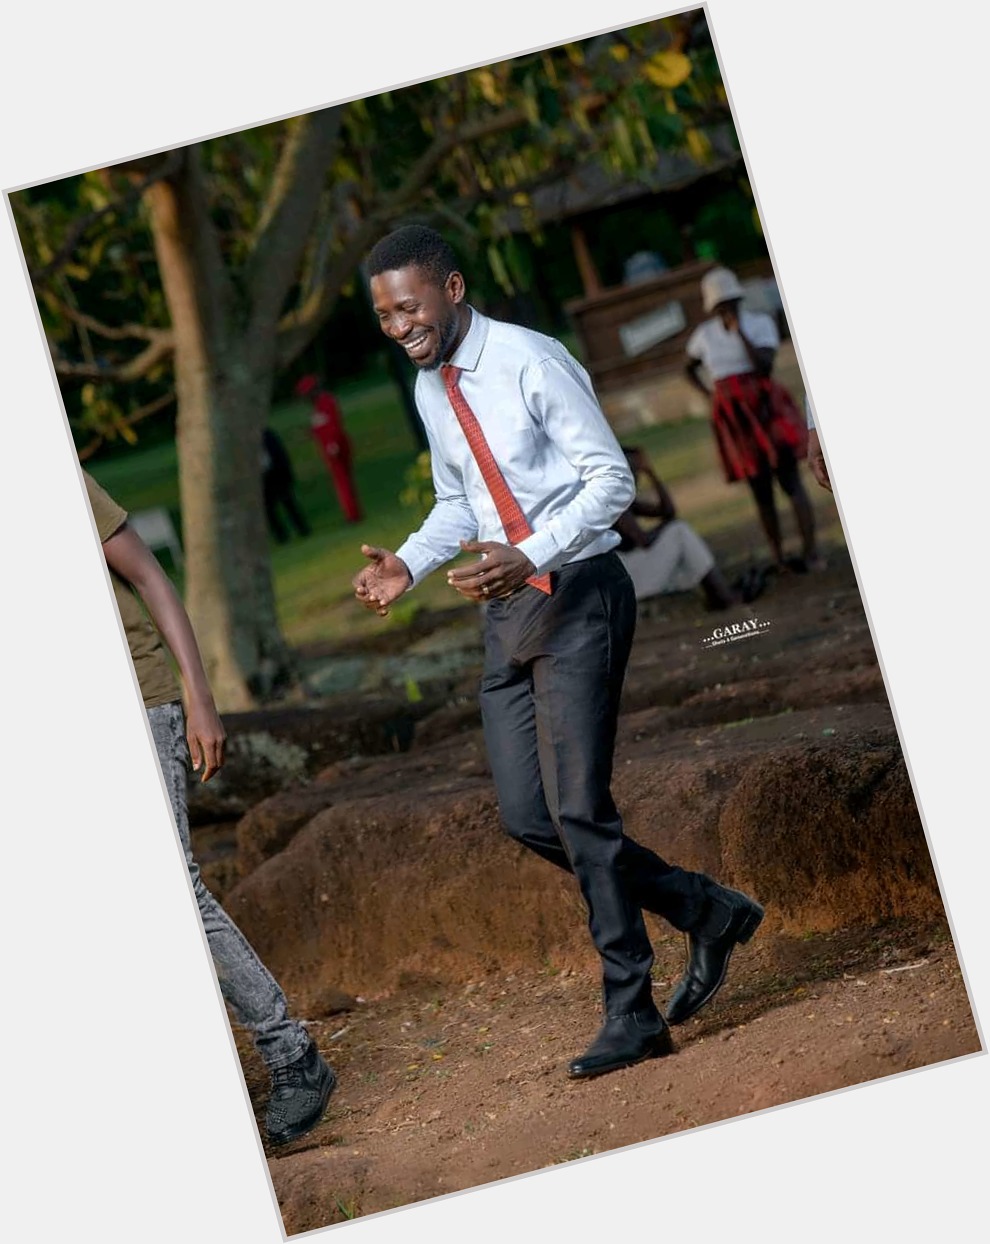 H.E BOBI WINE, HAPPY BIRTHDAY.
MAY YOU LIGHT MORE CANDLES IN LIFE. 